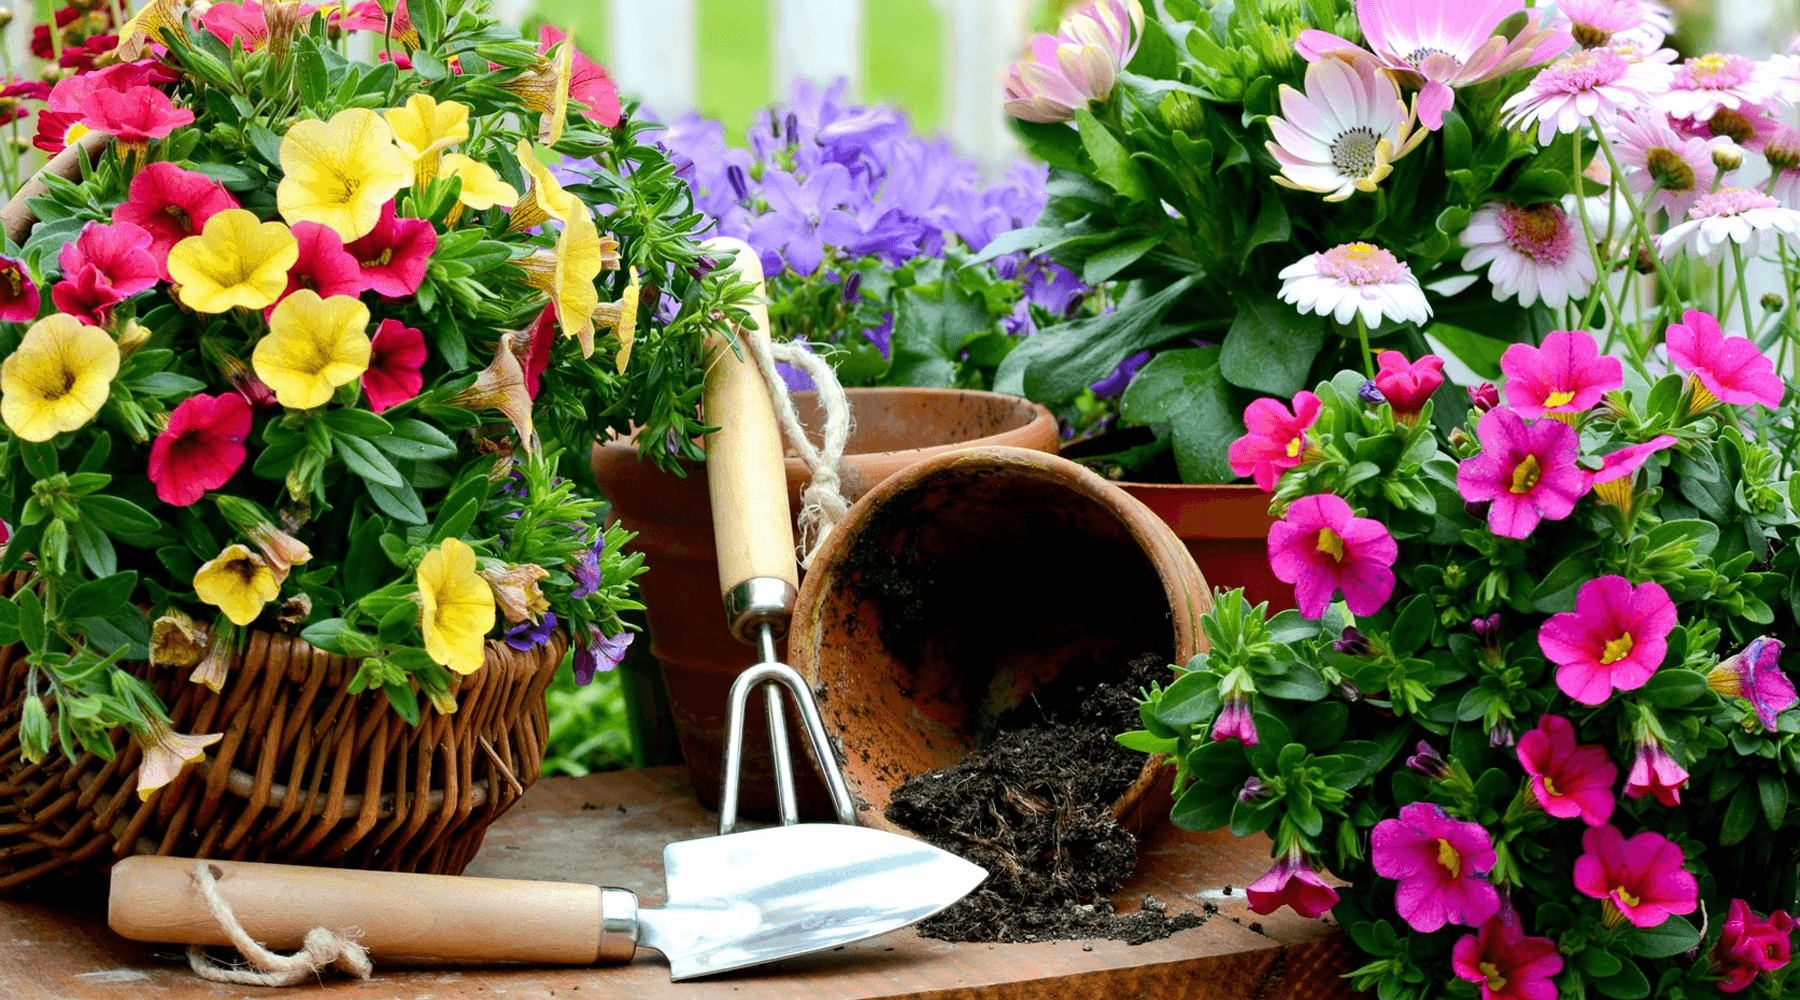 Simple Suggestions for your Garden in May